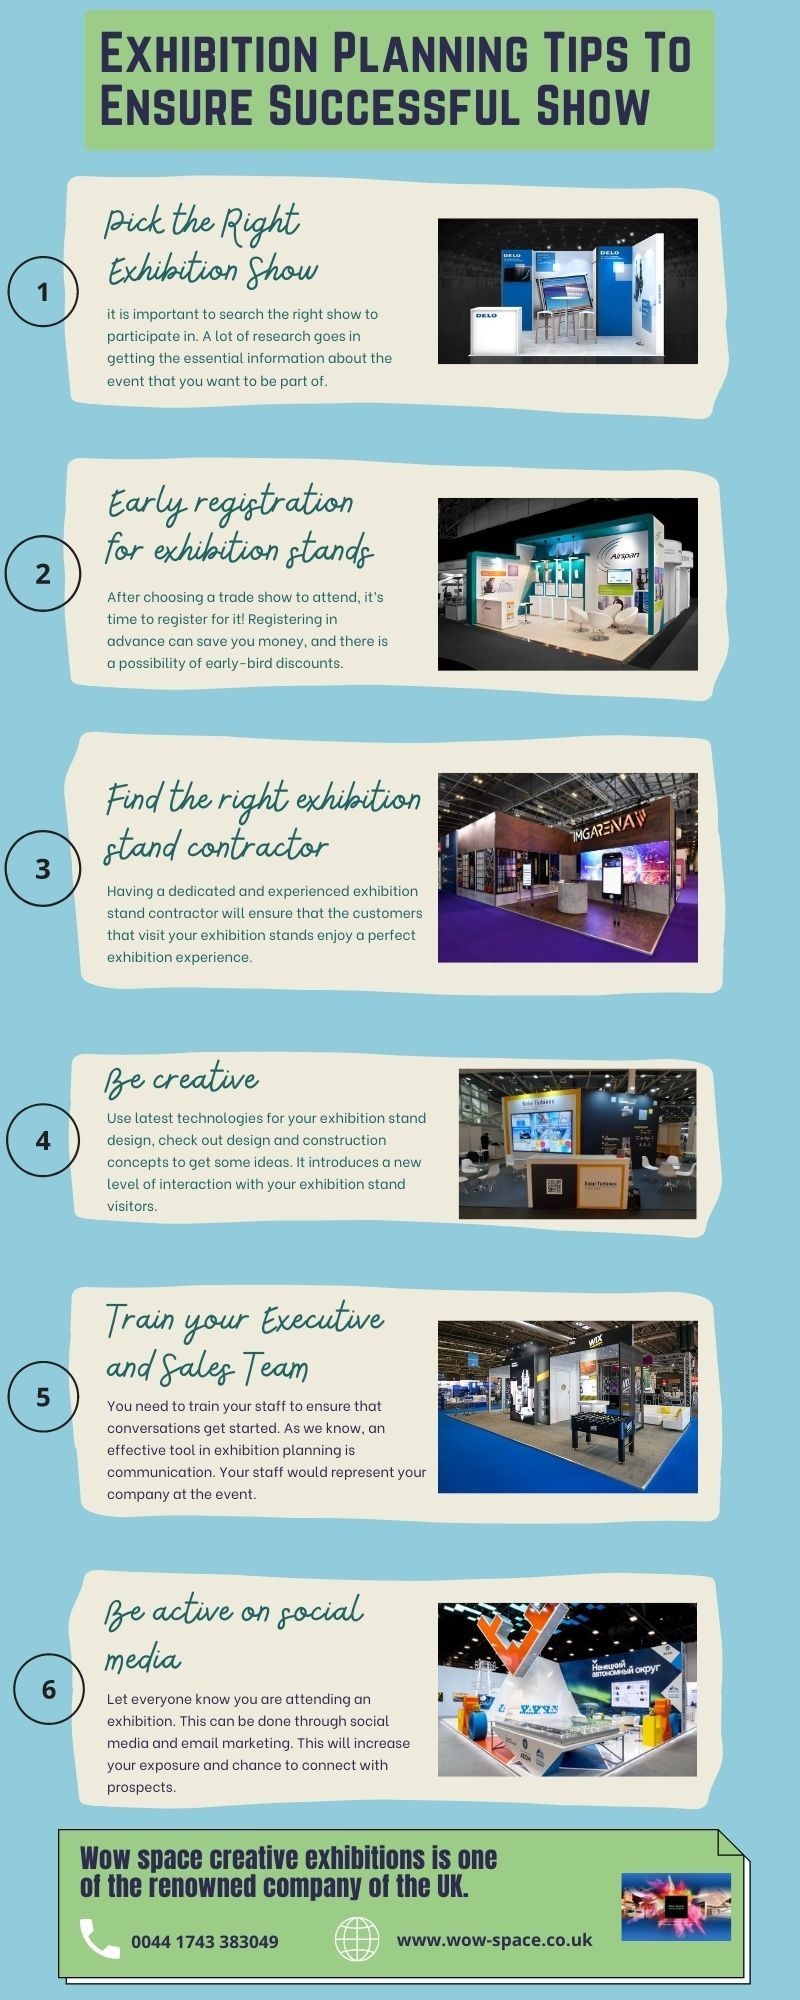 Exhibition Planning Tips To Ensure Successful Show